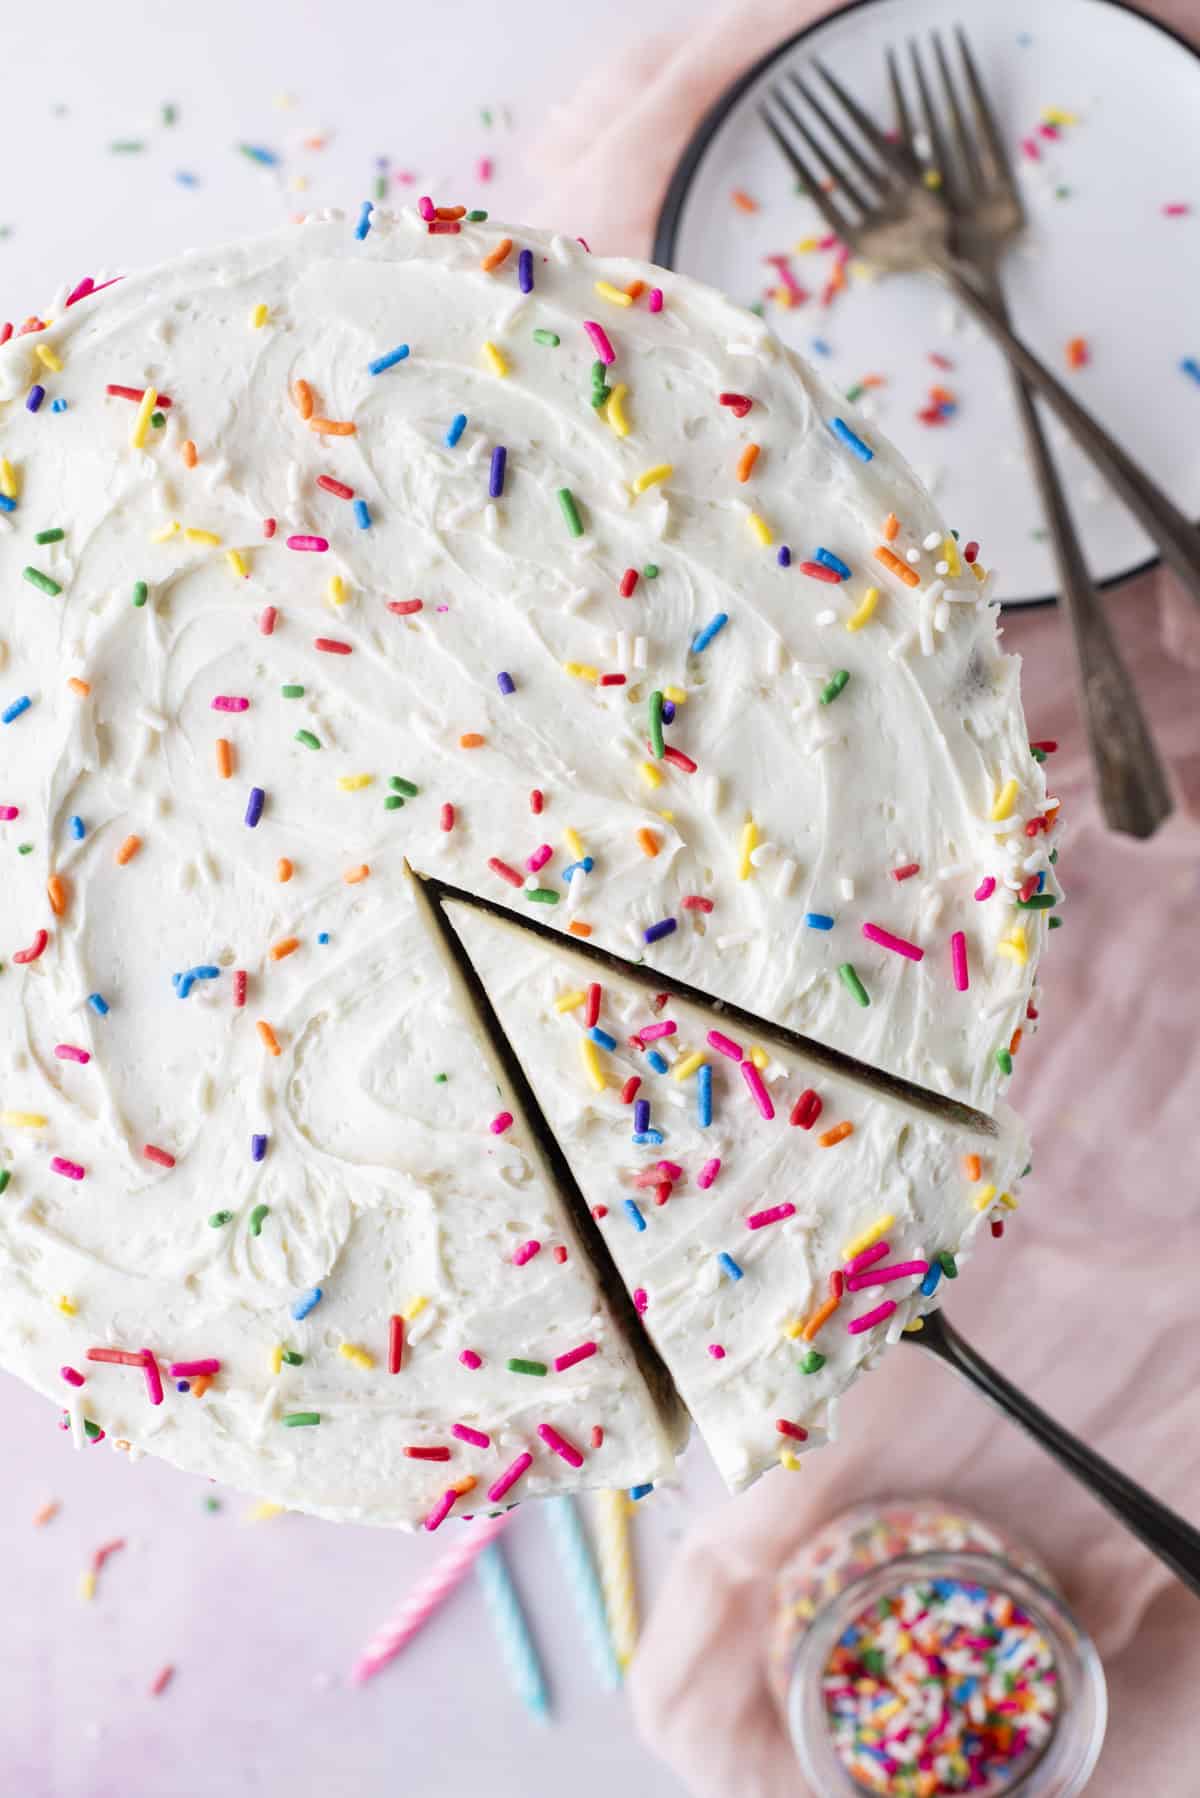 overhead view of one slice of funfetti cake that's been sliced but just barely pulled away from the cake by a spatula, with birthday candles, sprinkles, a plate and forks surrounded the cake stand